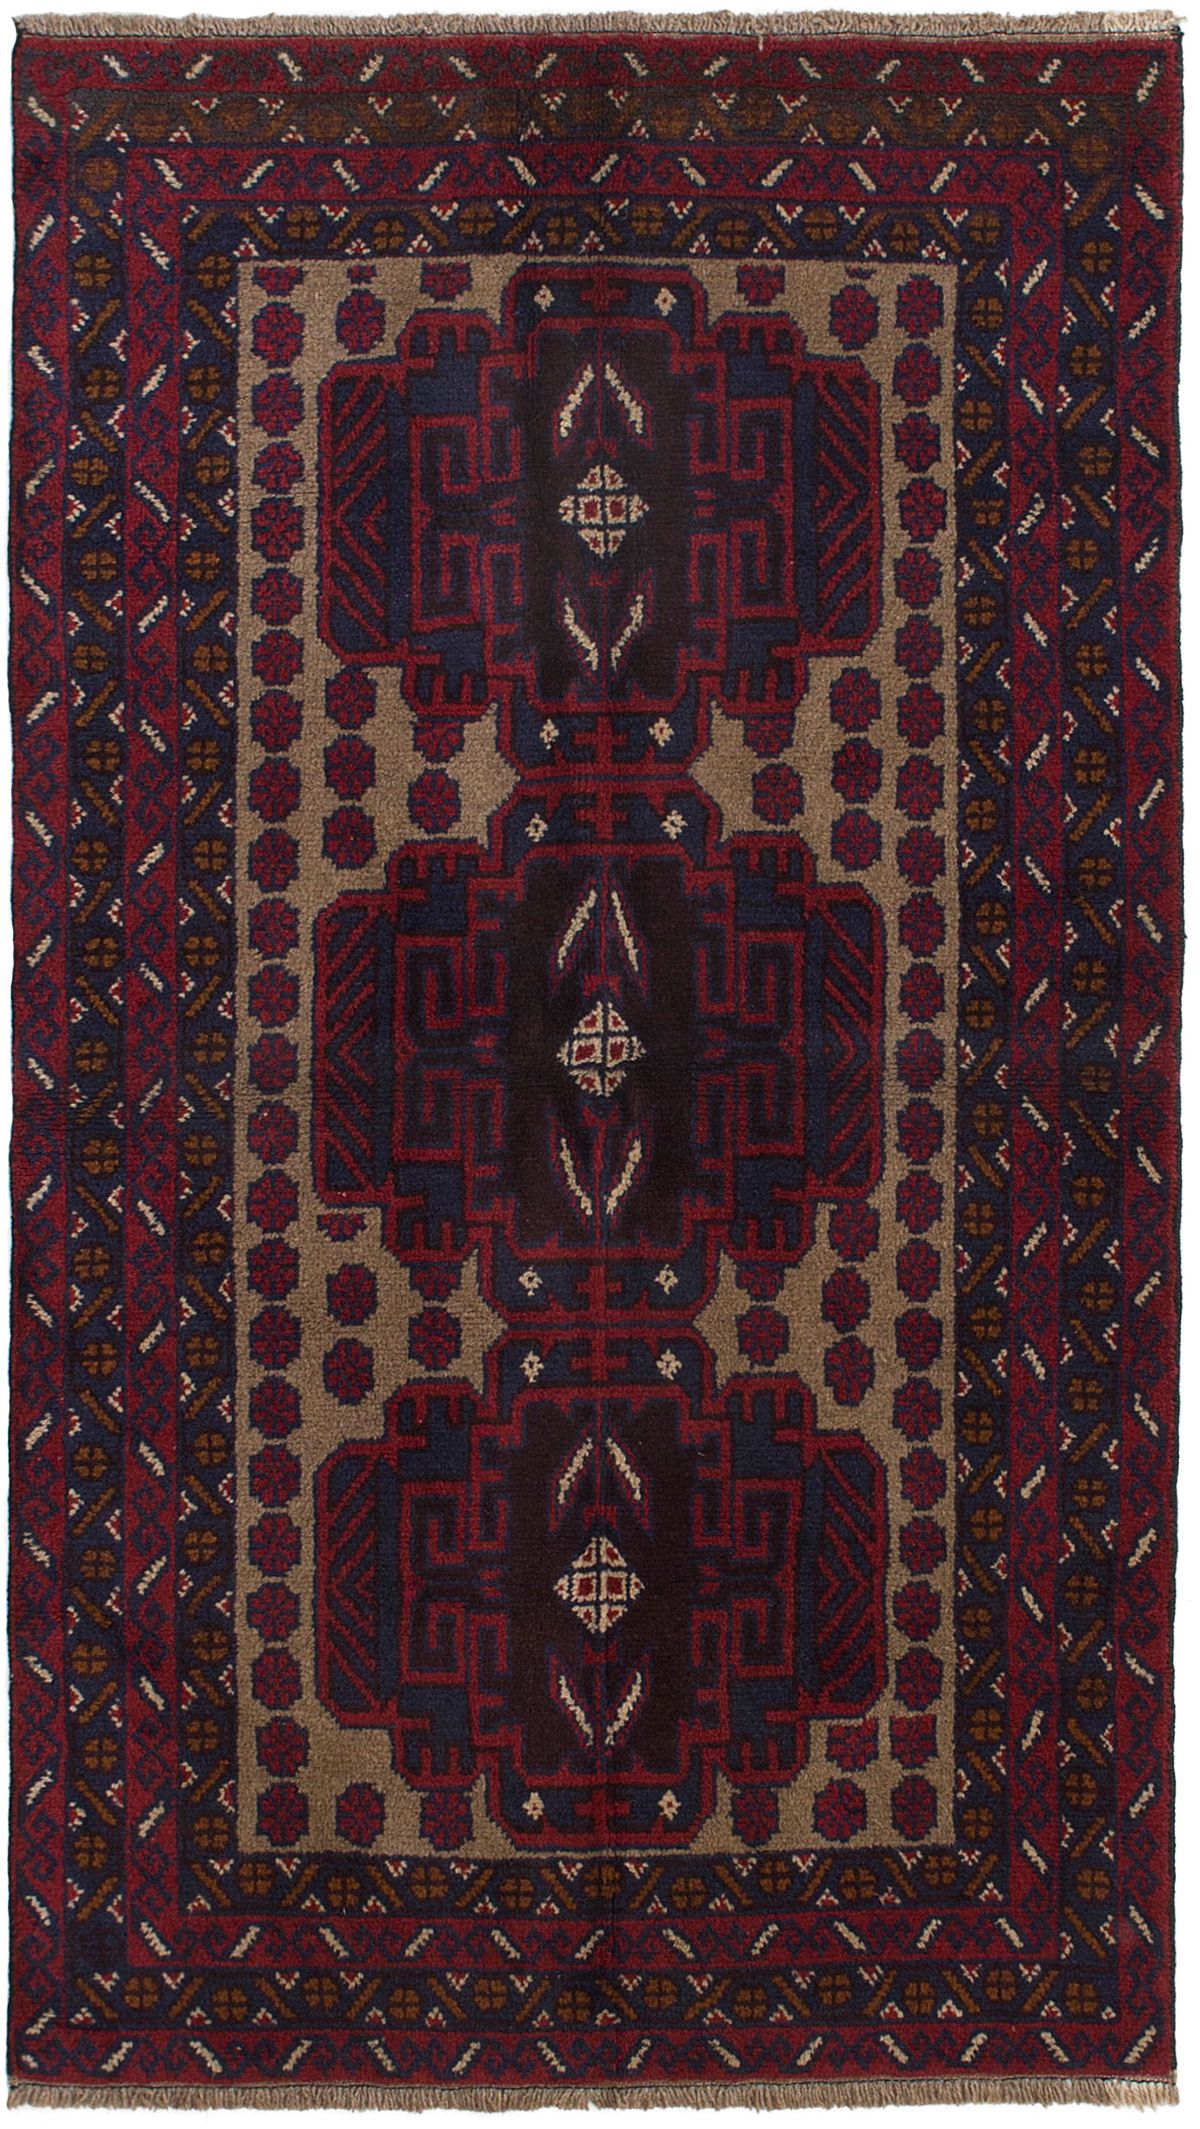 Hand-knotted Kazak Red Wool Rug 3'7" x 6'4" (45) Size: 3'7" x 6'4"  